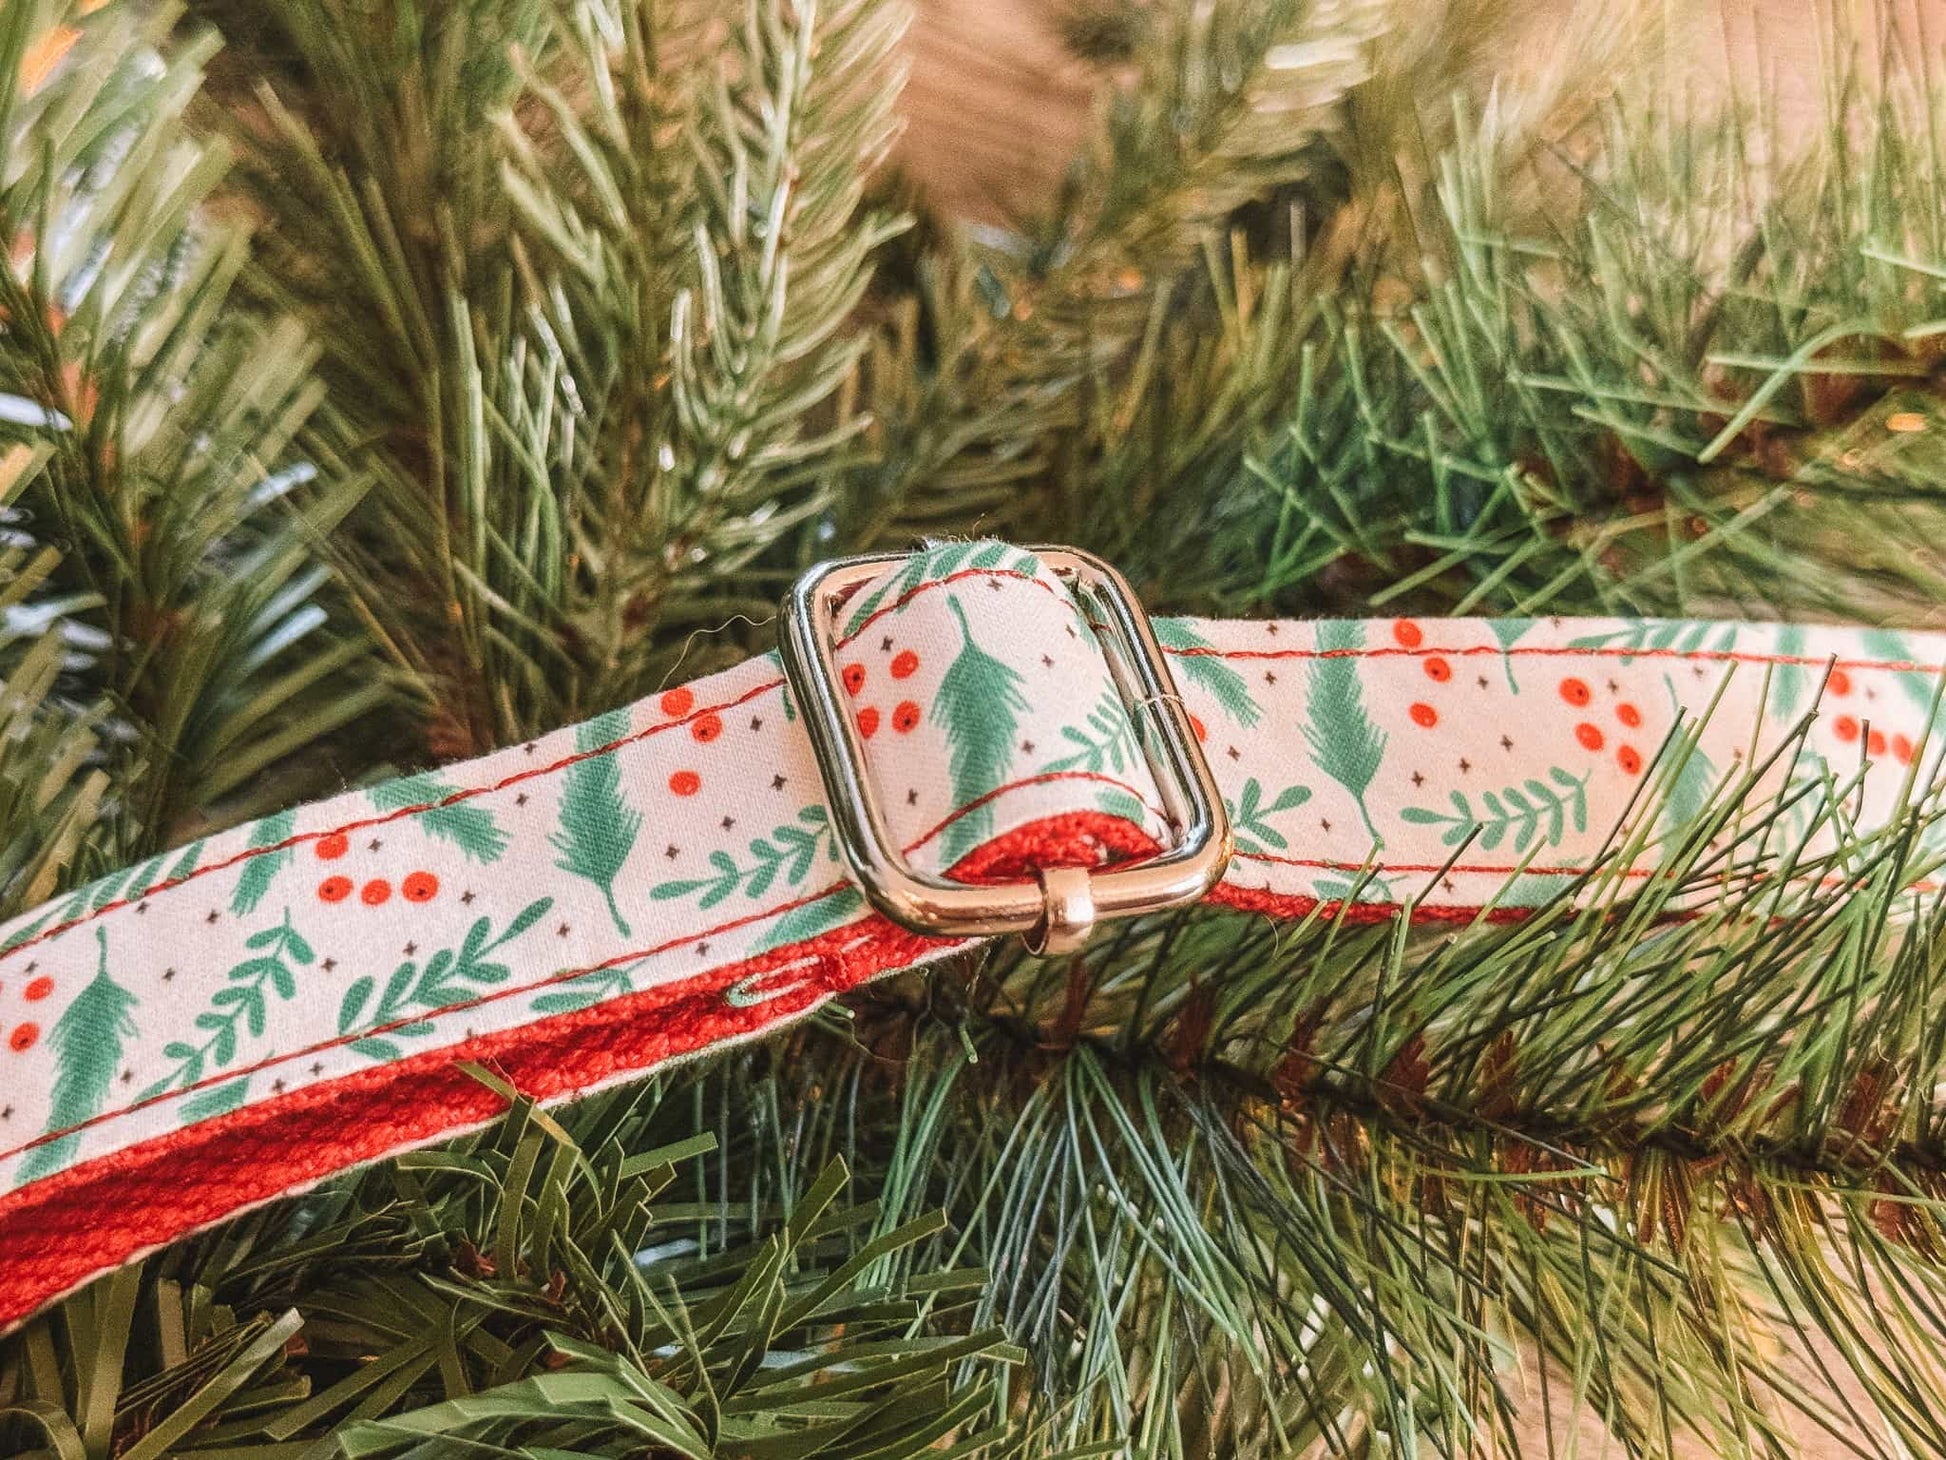 Limited Edition White Christmas Engraved Dog Collar & Bow Tie - Sam and Dot